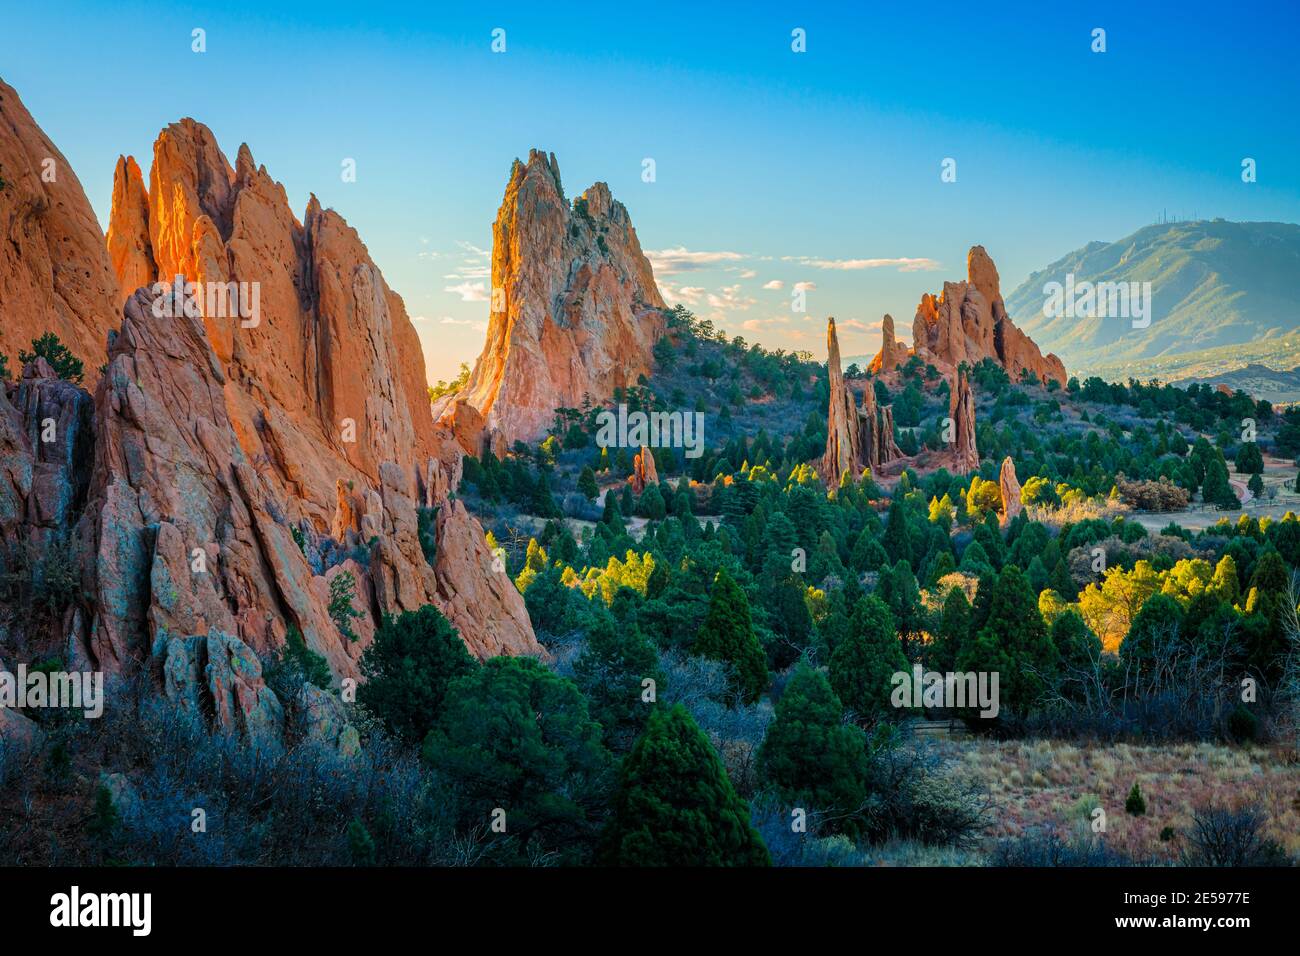 Garden of the Gods is a public park located in Colorado Springs, Colorado, United States. Stock Photo